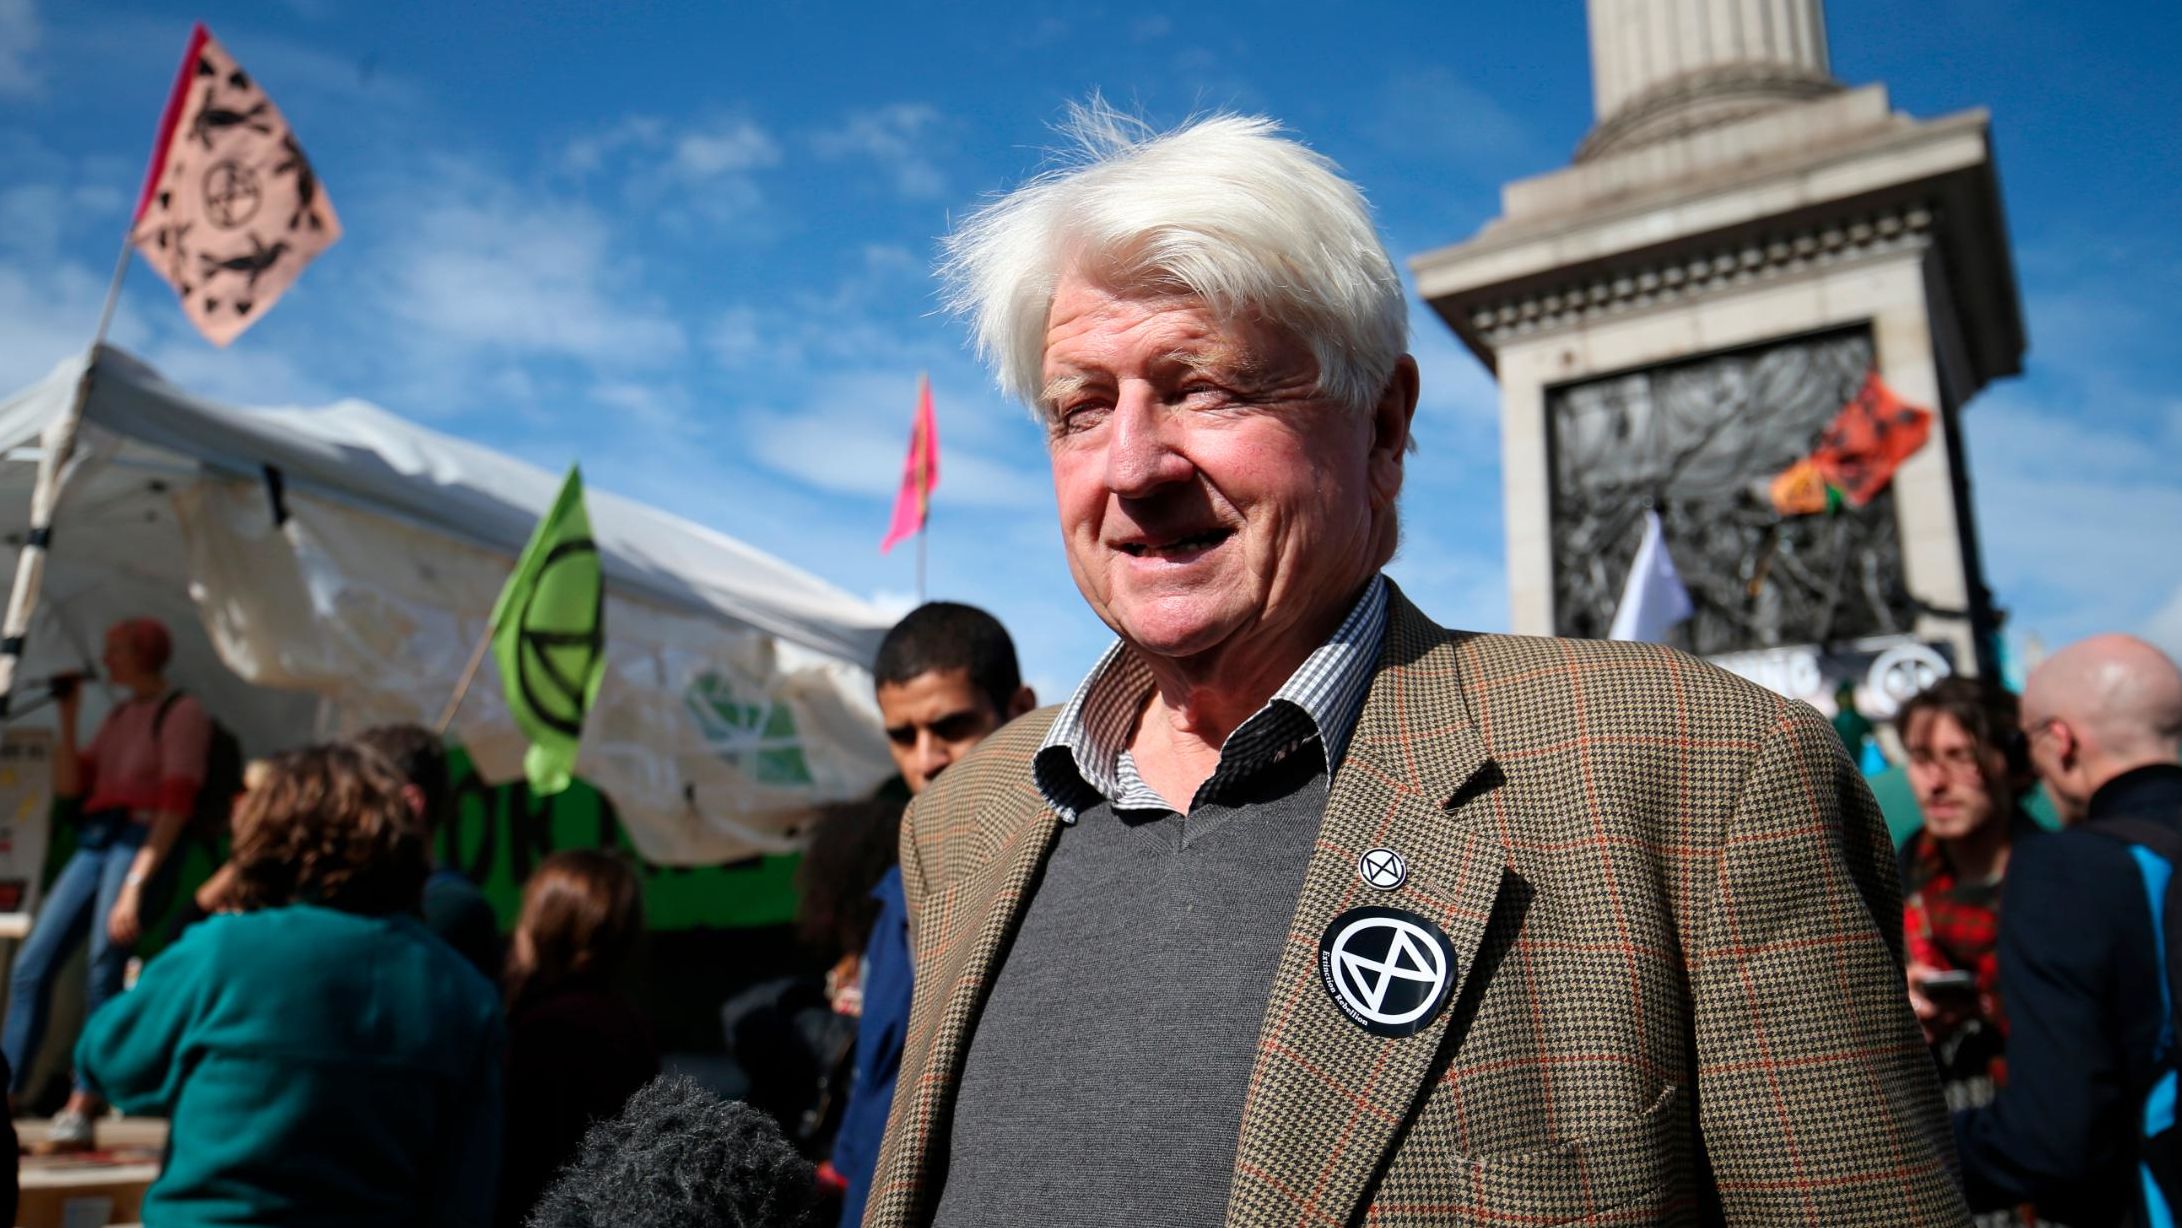 Stanley Johnson, father of British Prime Minister Boris Johnson, joins protesters in London's Trafalgar Square on October 9. Days before, his son described Extinction Rebellion protesters as "hemp-smelling," "uncooperative crusties."